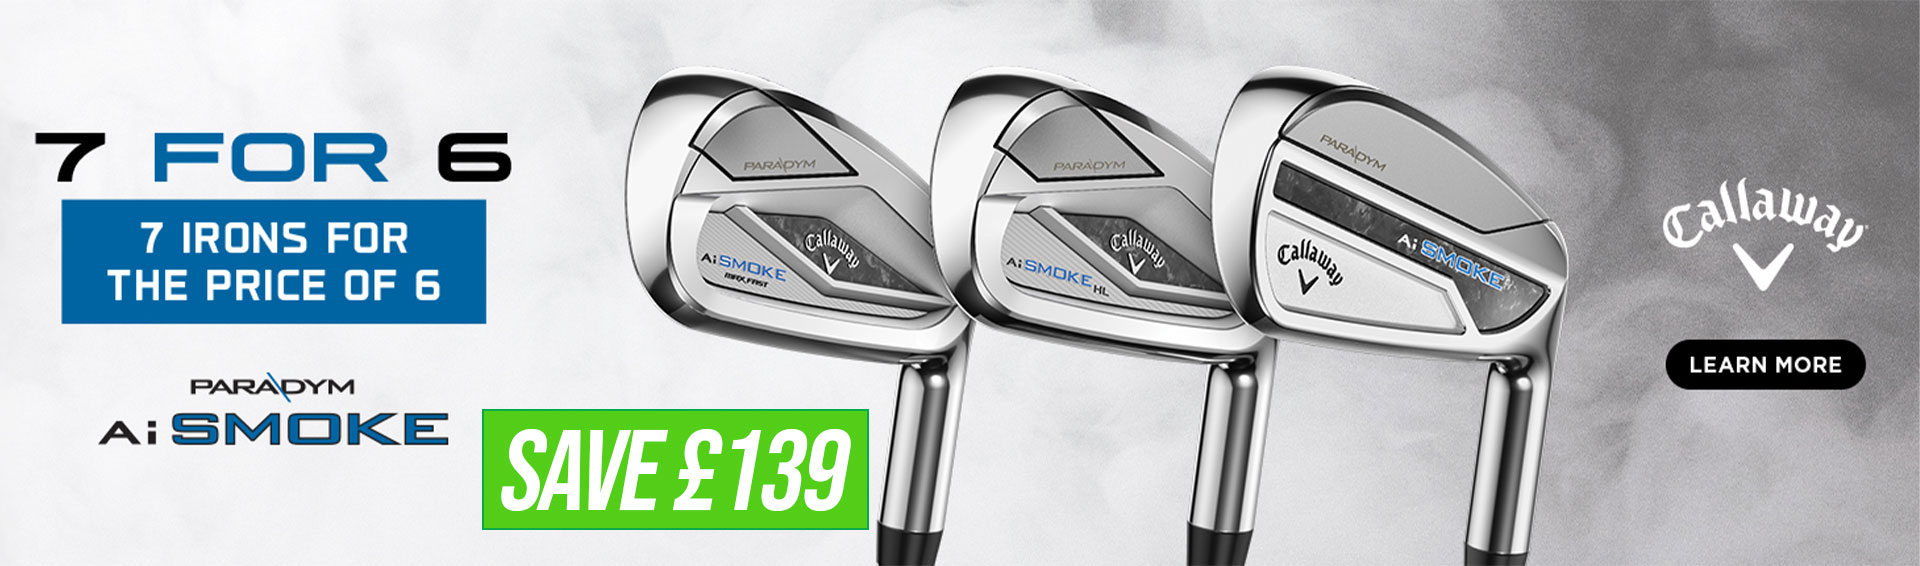 Callaway Irons Offer 7 For 6